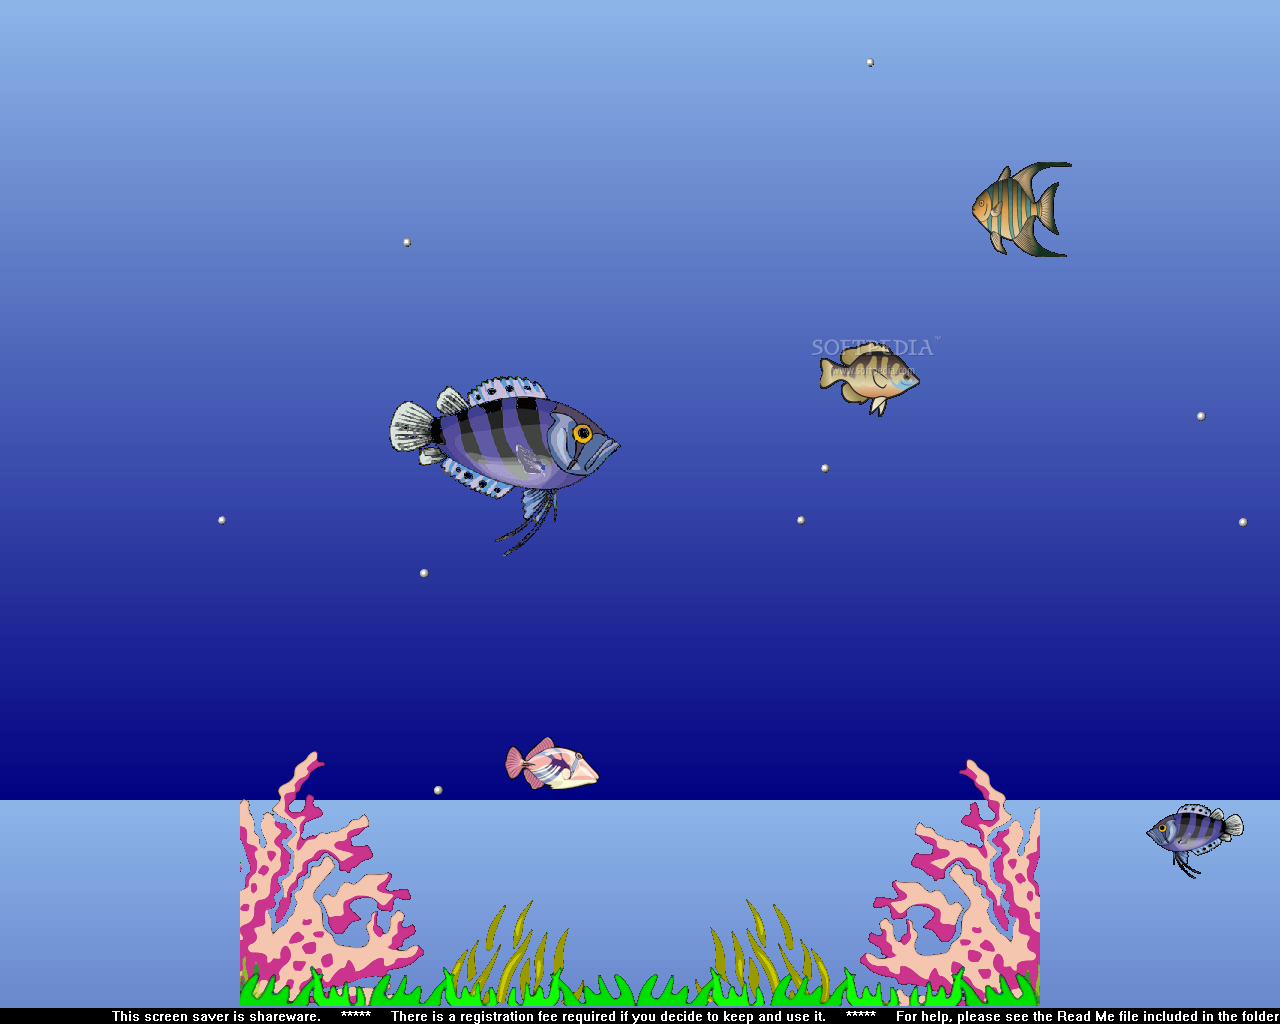 Forth Across Your Screen While Smaller Fish Move In The Background